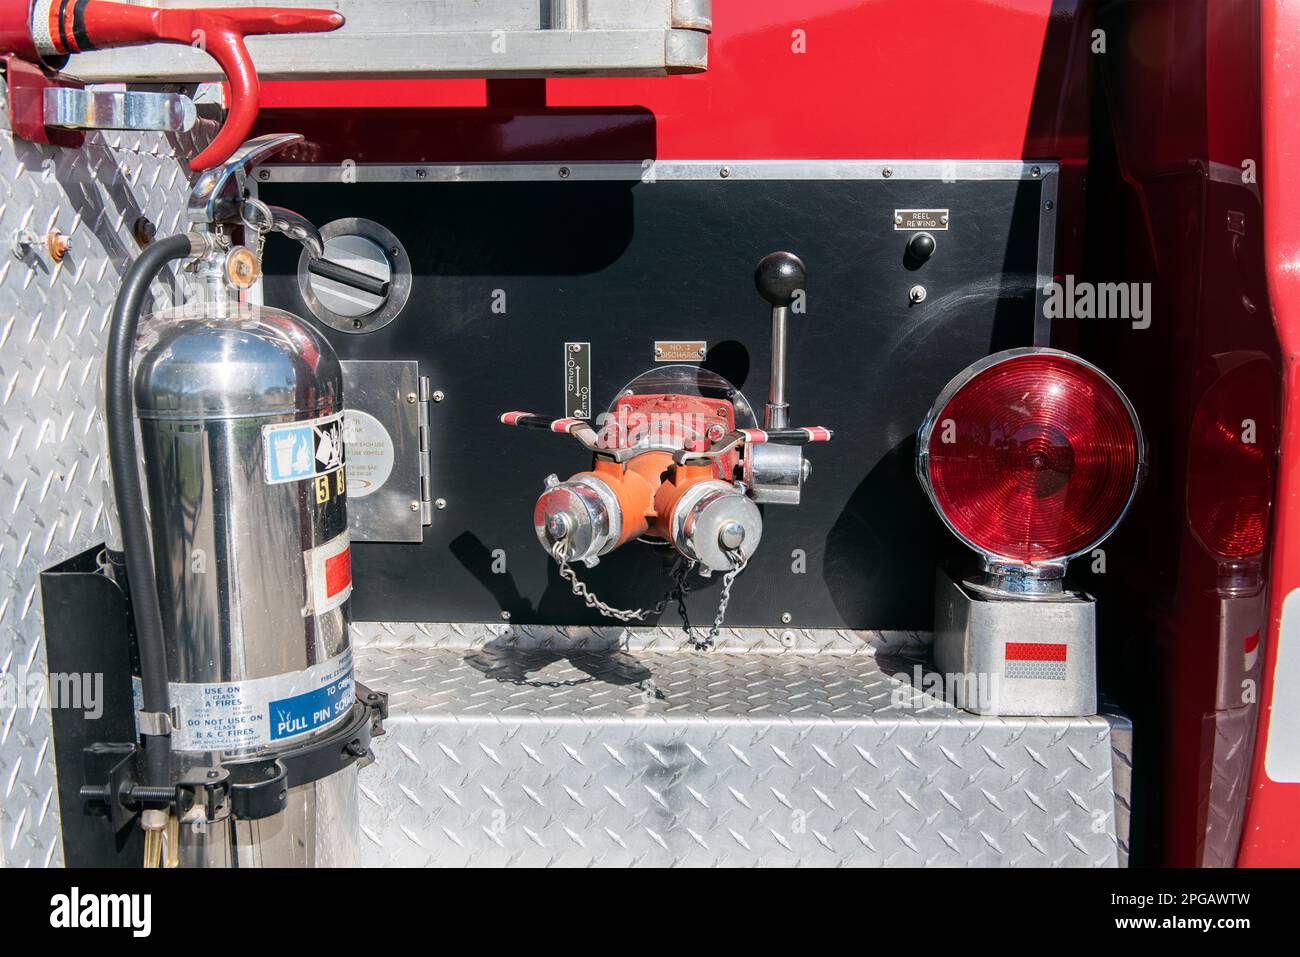 Rear of heavy duty fire truck has large water control valves and lever for connecting hoses to. Stock Photo